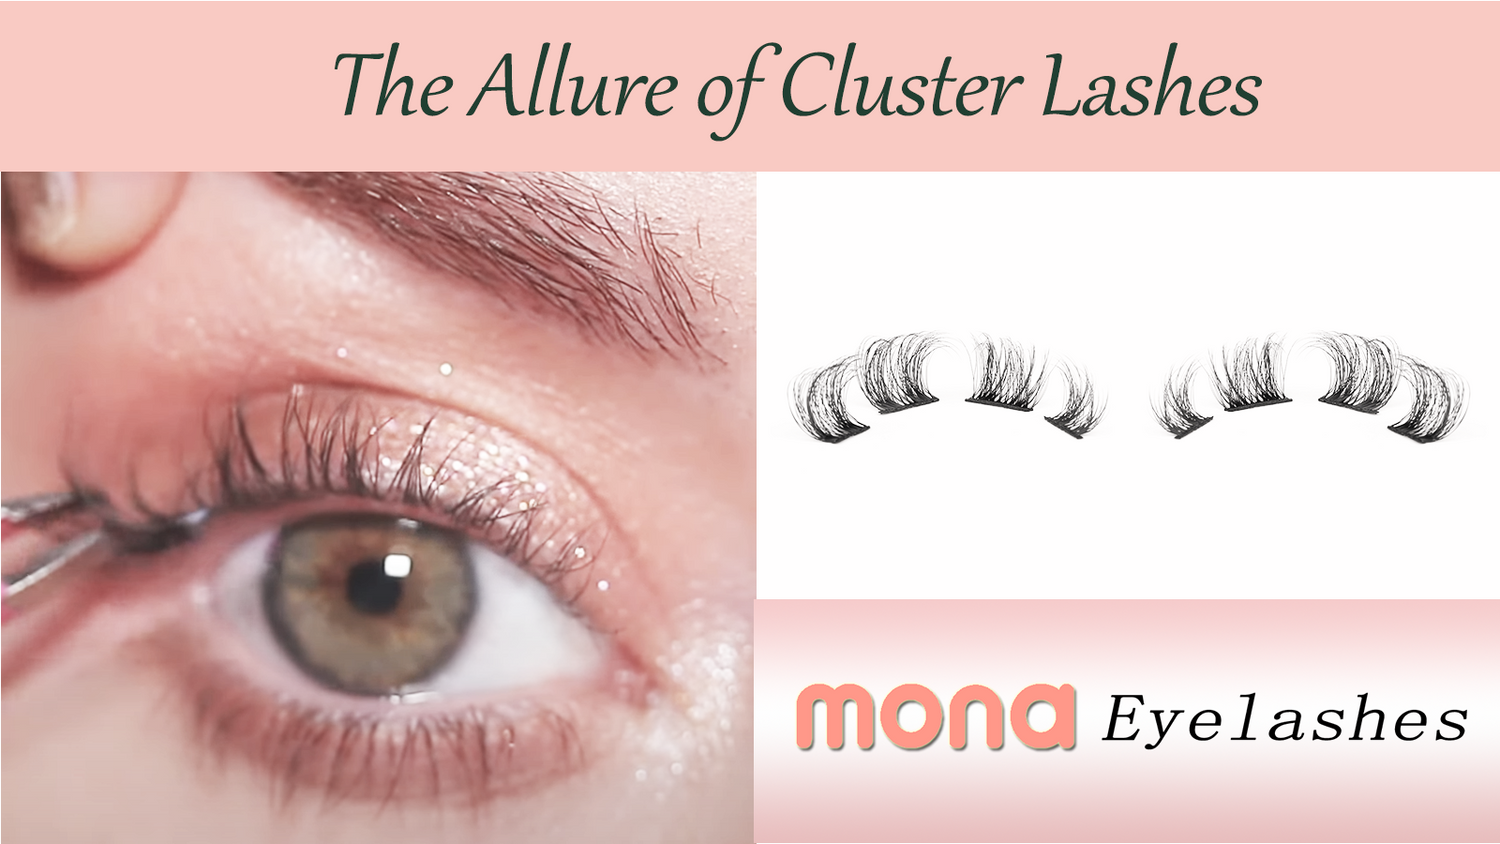 The Allure of Cluster Lashes